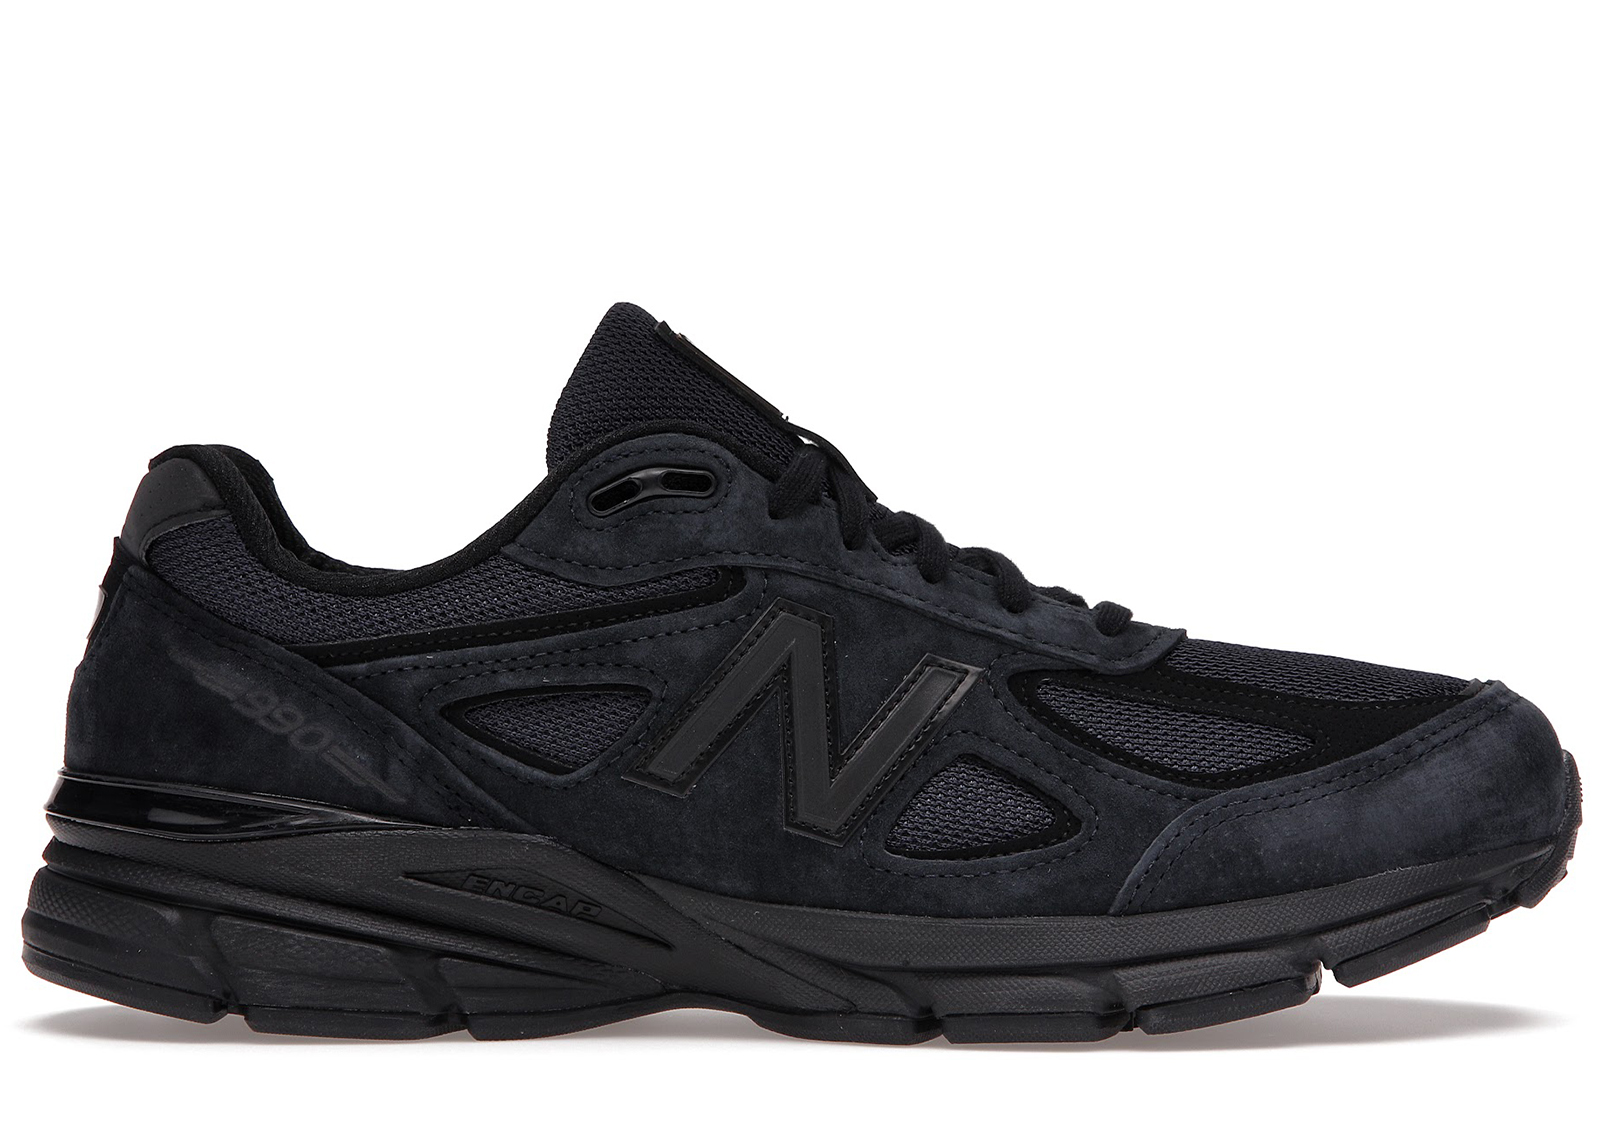 Buy New Balance 990v4 Shoes & New Sneakers - StockX